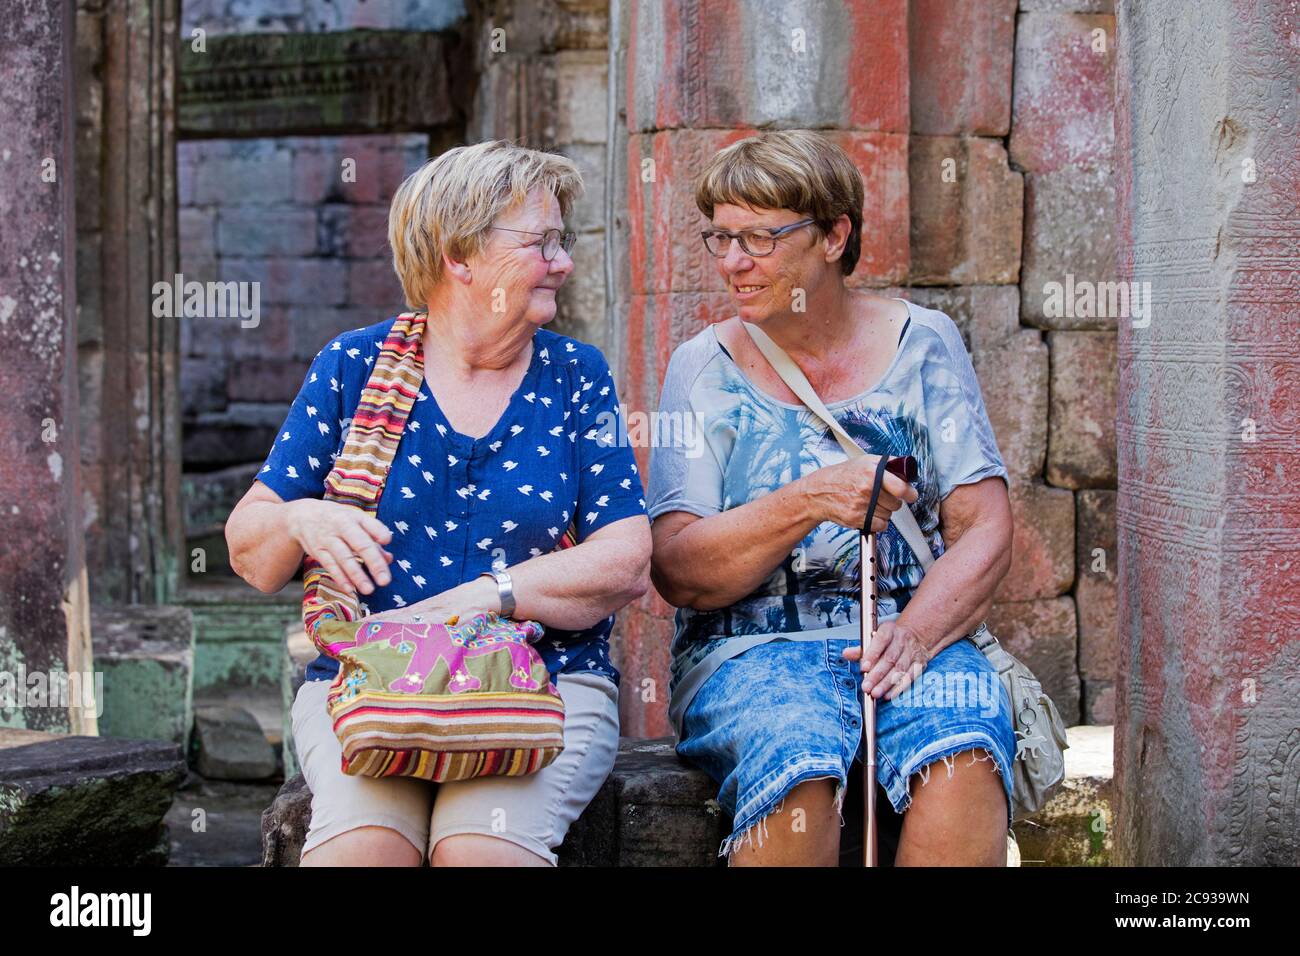 Two Western elderly female tourists resting in 12th century temple complex Angkor Wat, dedicated to the god Vishnu, Siem Reap, Cambodia, Asia Stock Photo